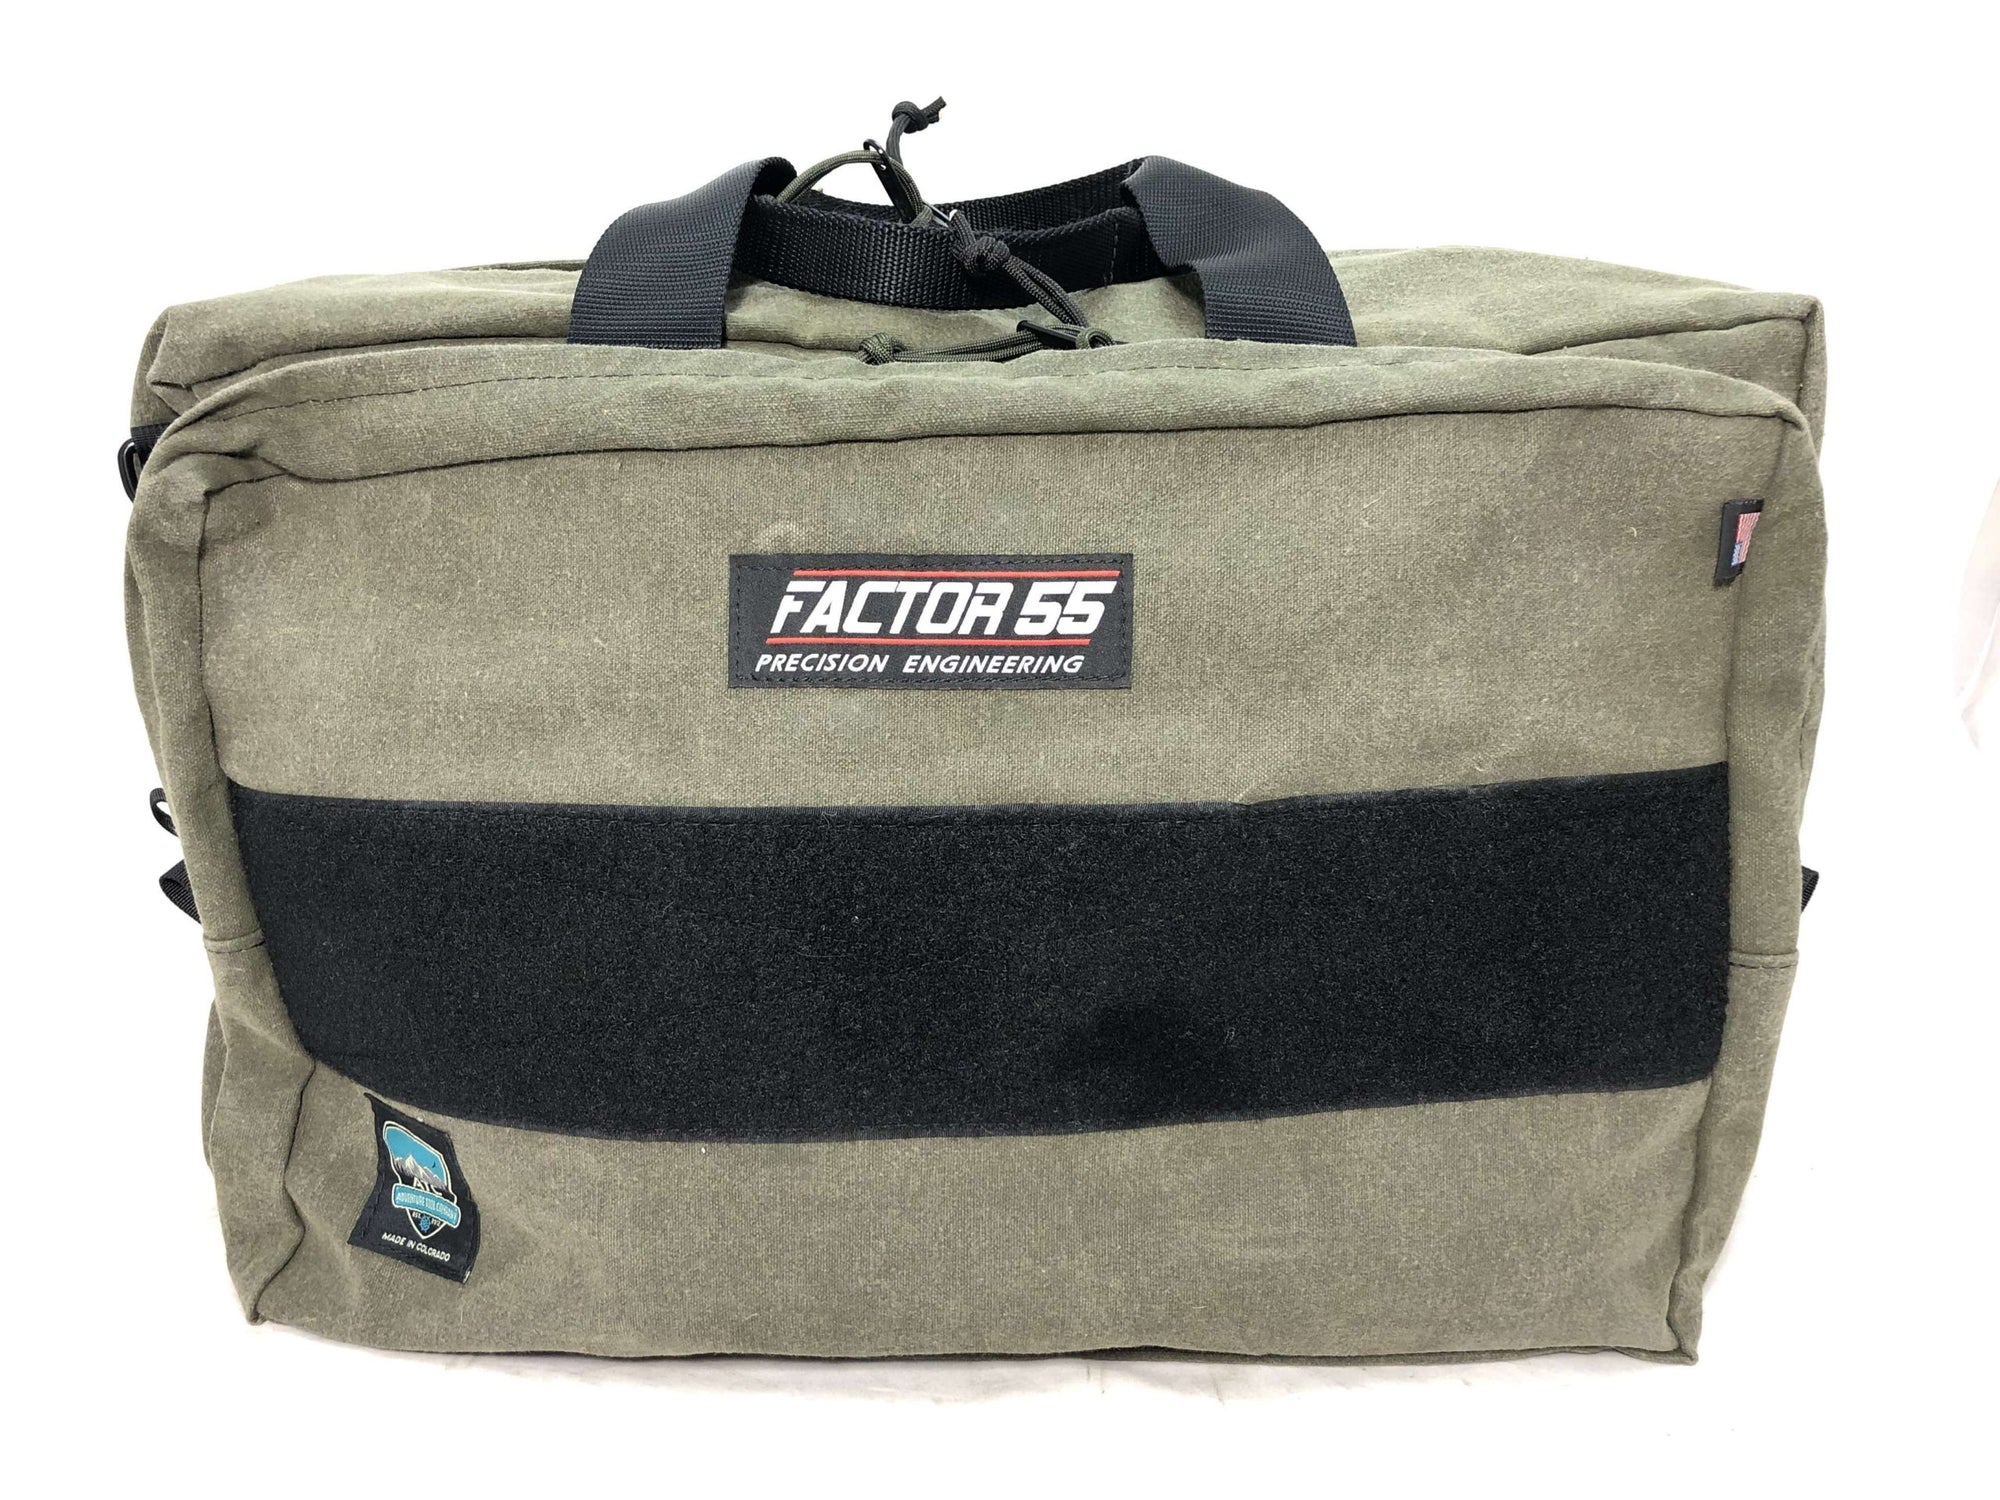 Factor 55 Ultimate Recovery Bag – Large